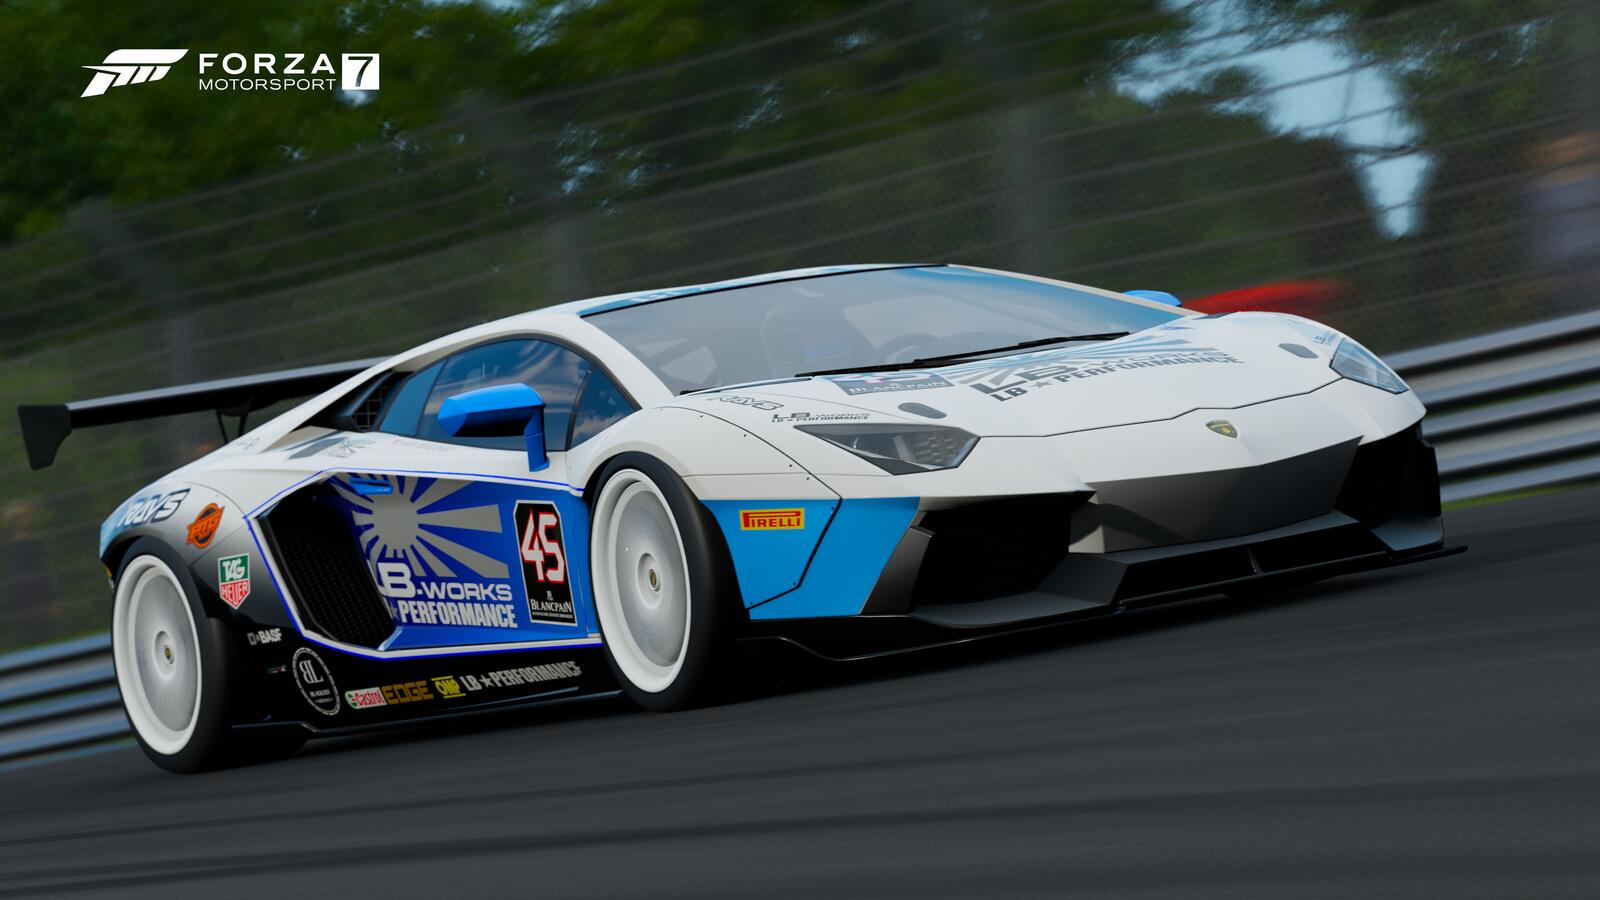 Wallpapers Forza cars games on the desktop